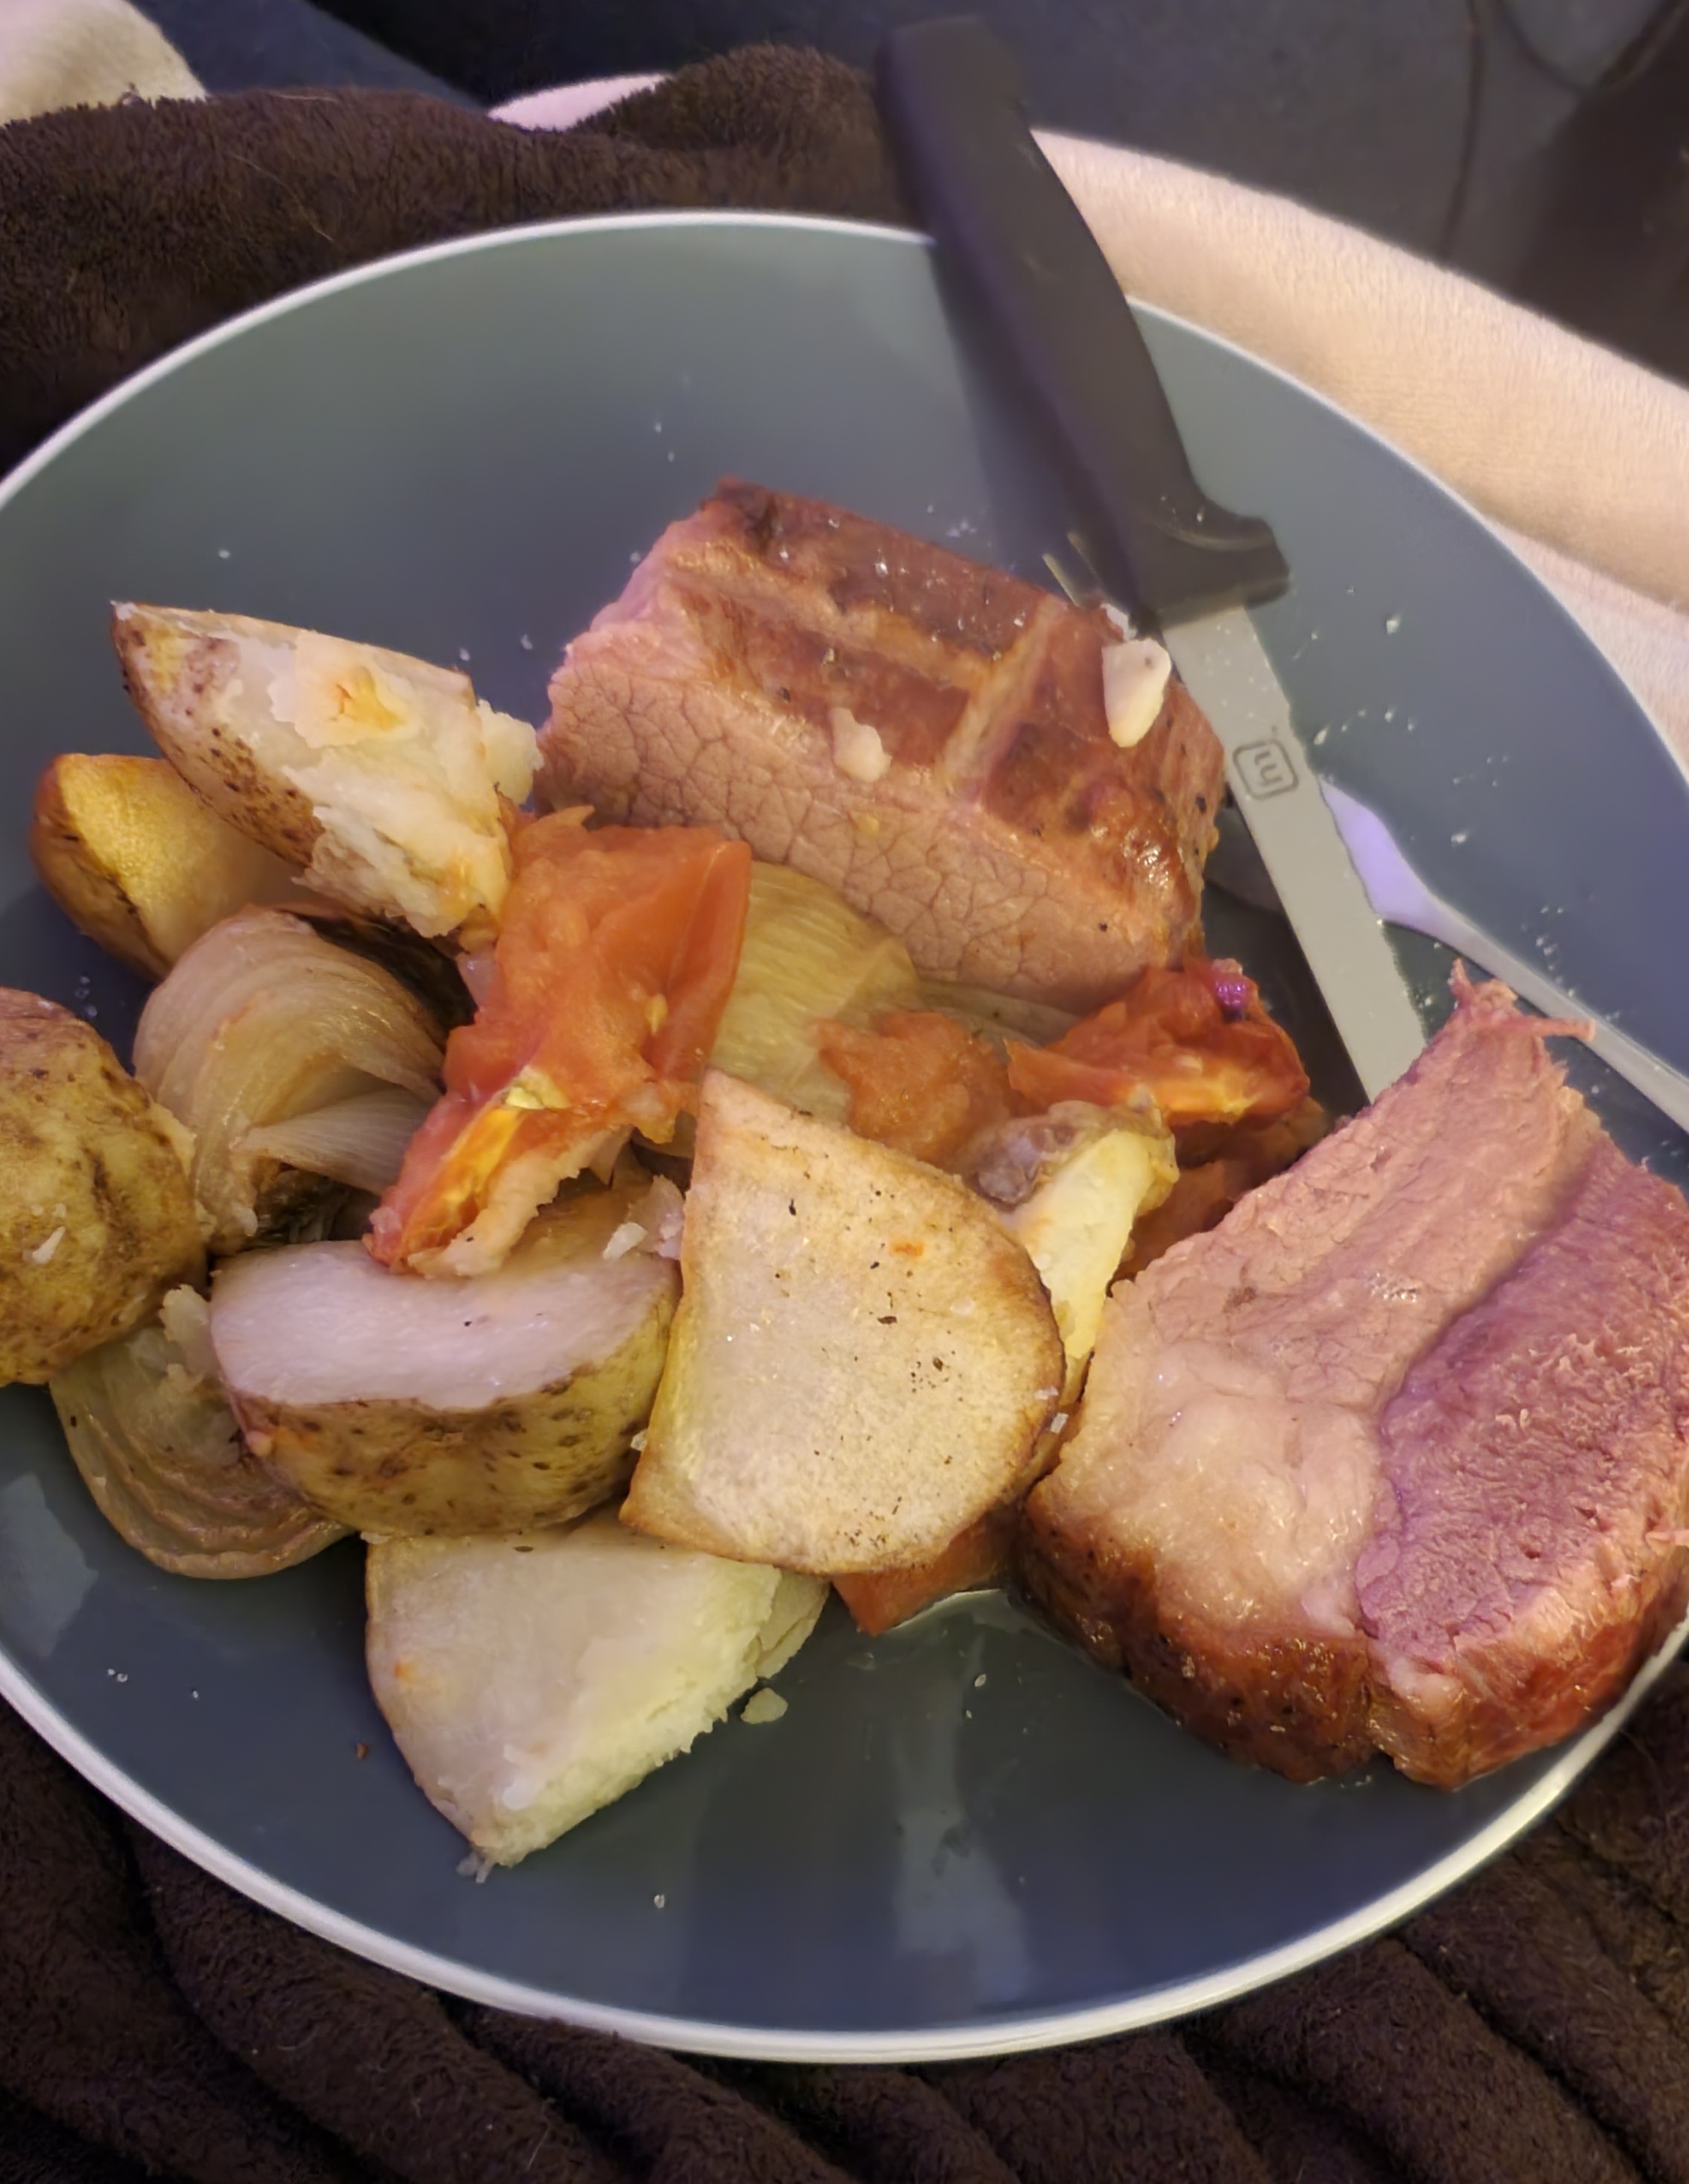 blue dinner plate with roast silverside, potatoes, onions, and tomatoes